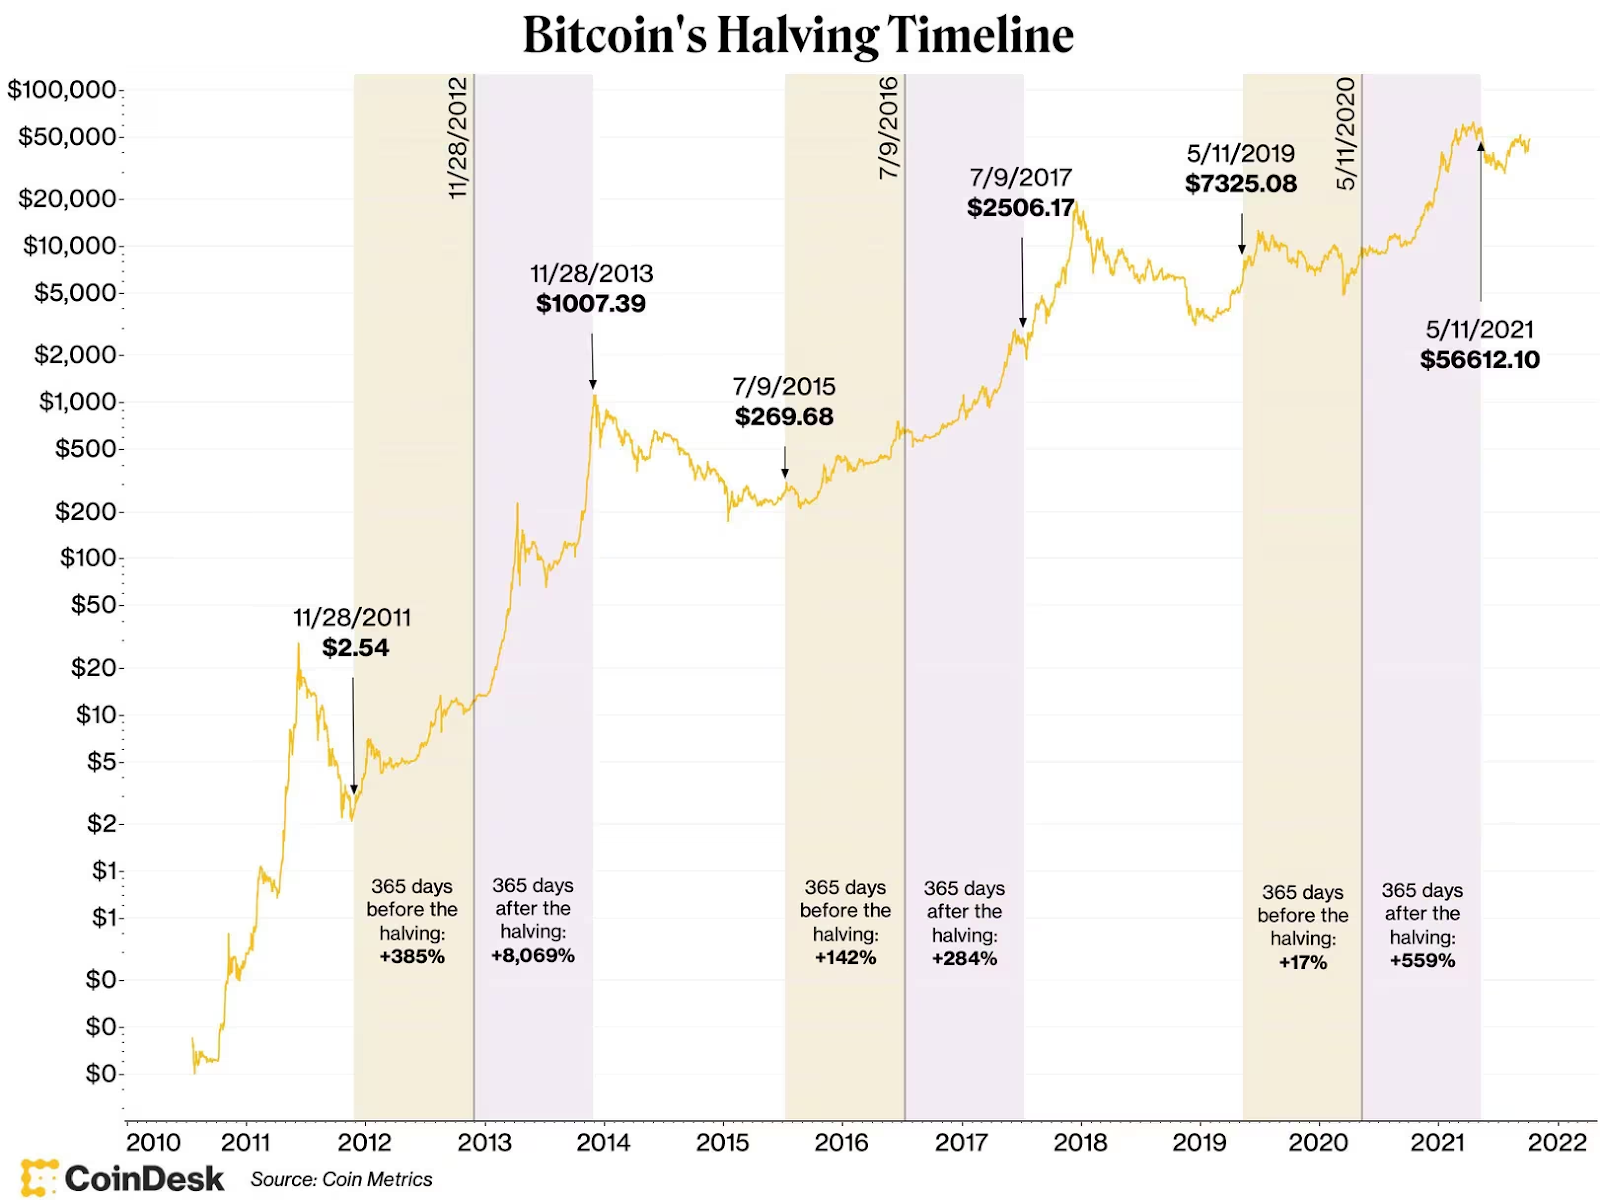 Bitcoin 2024 Halving Frenzy: The Facts, The Data, The Predictions